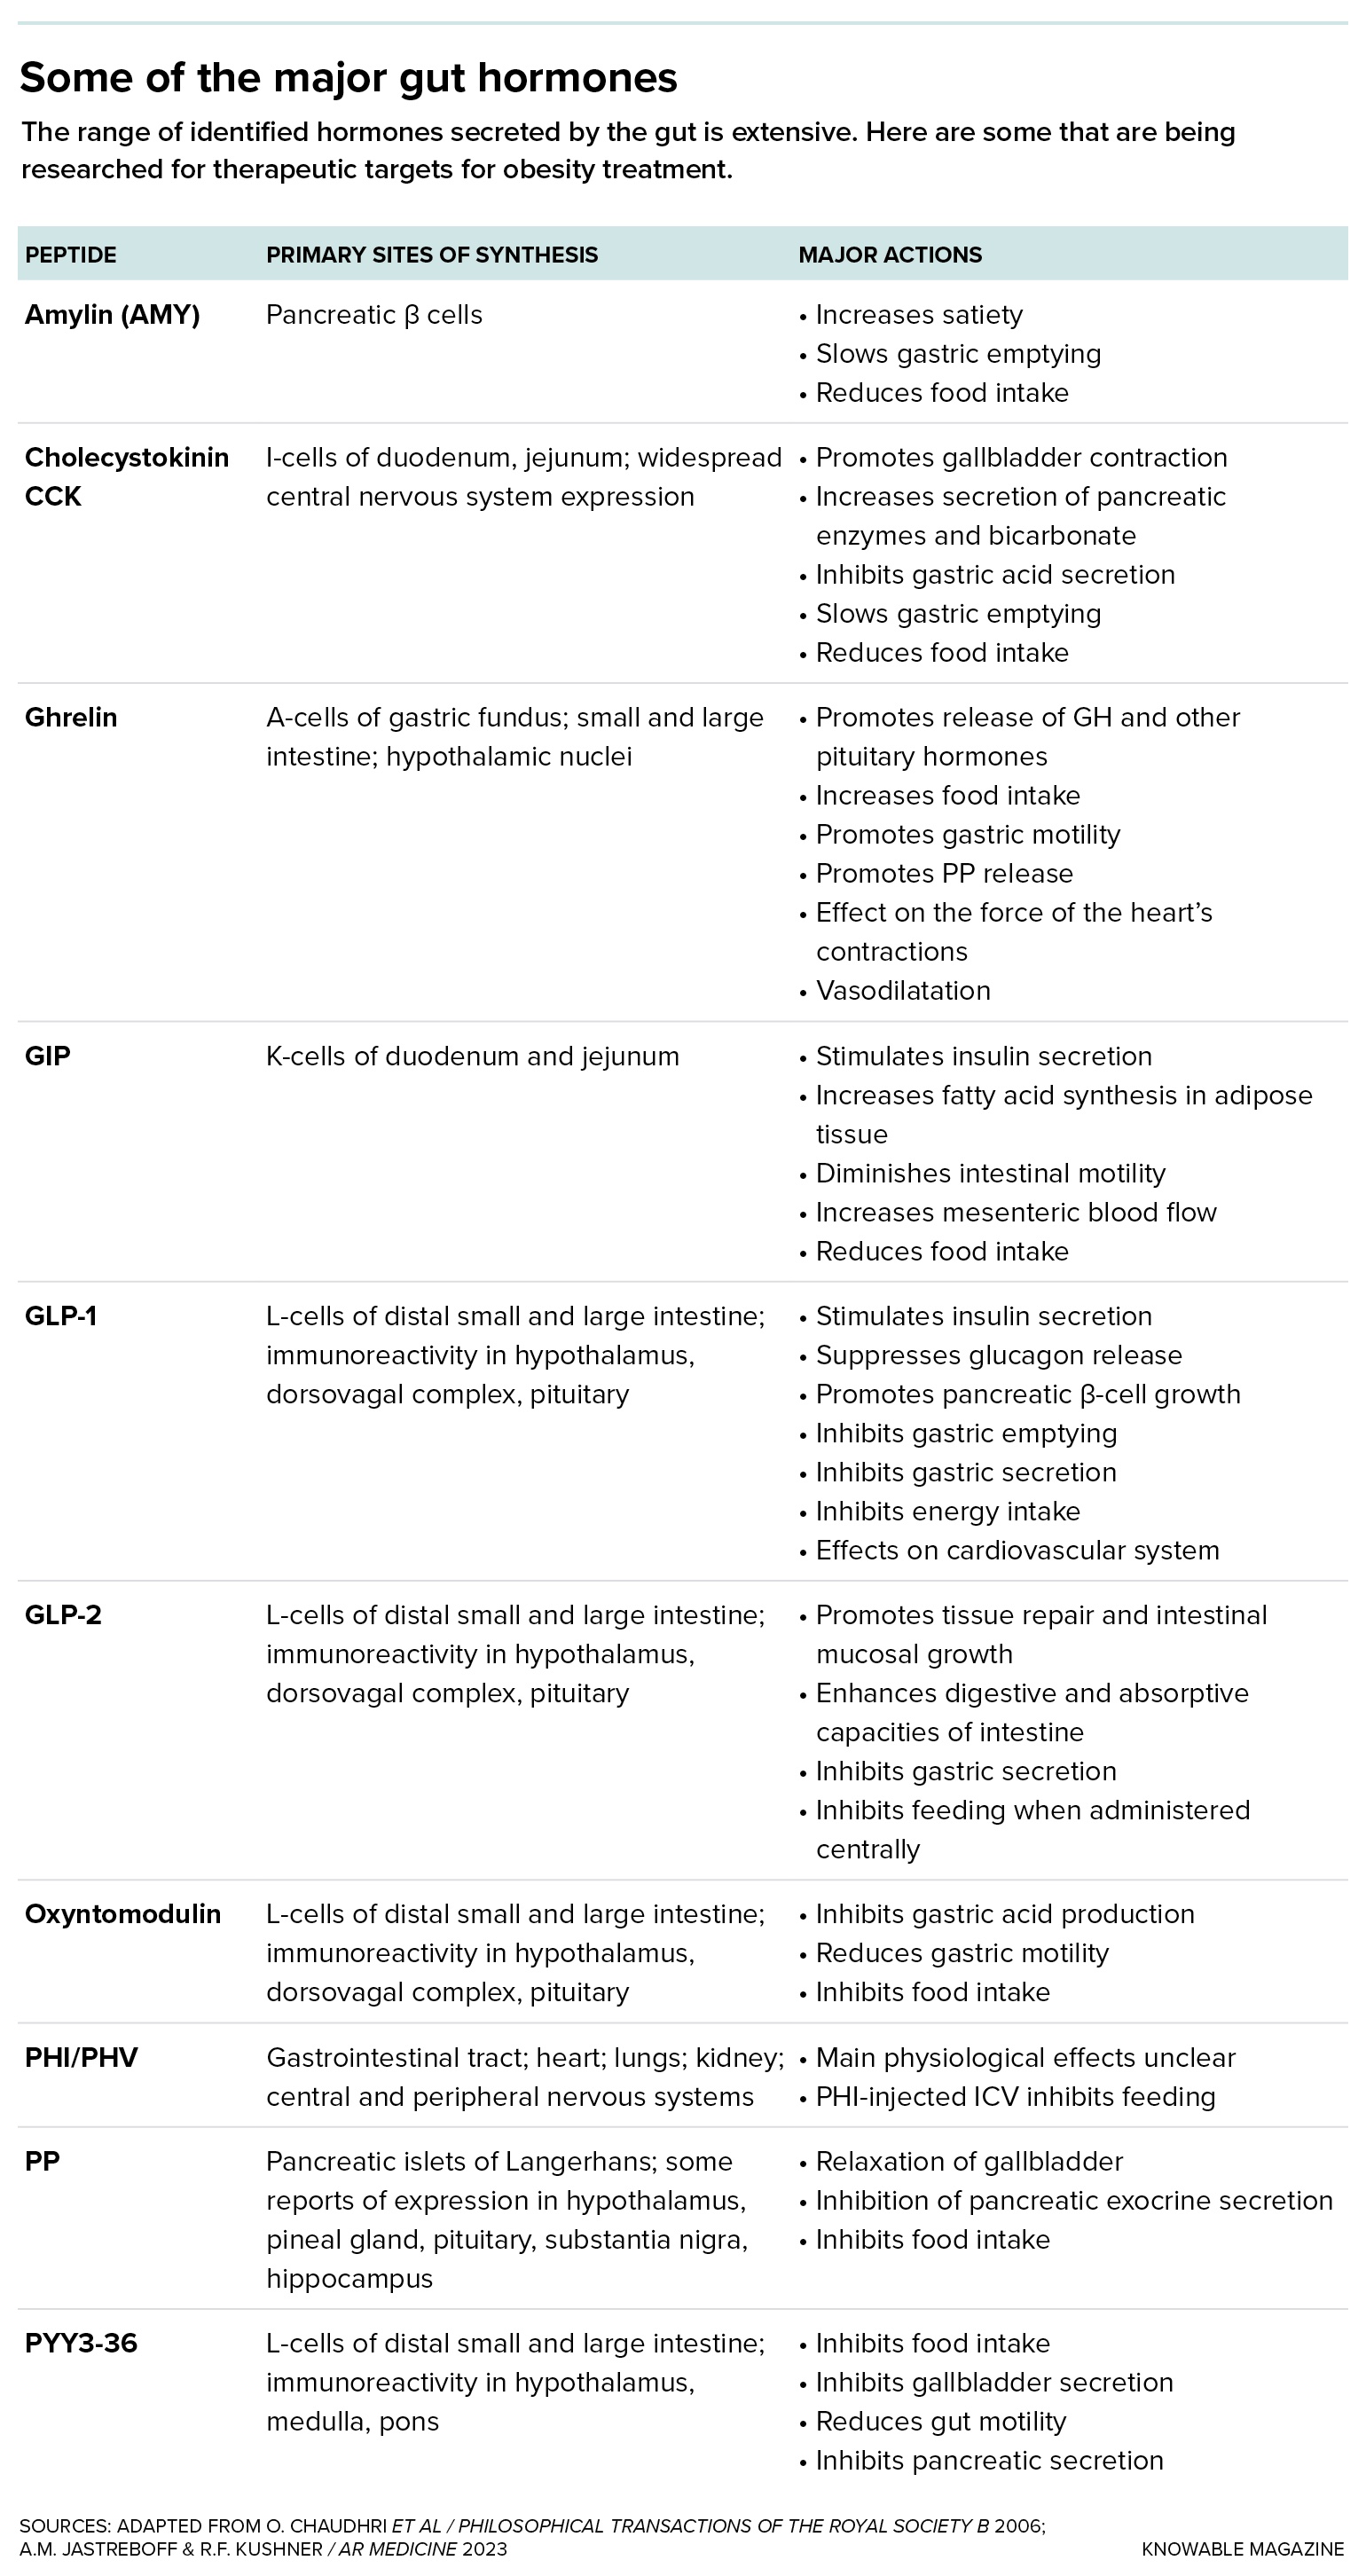 Table listing major gut hormones, their sources, functions, and effects on the body, such as insulin, ghrelin, and glucagon, summarized in a clear, organized format.